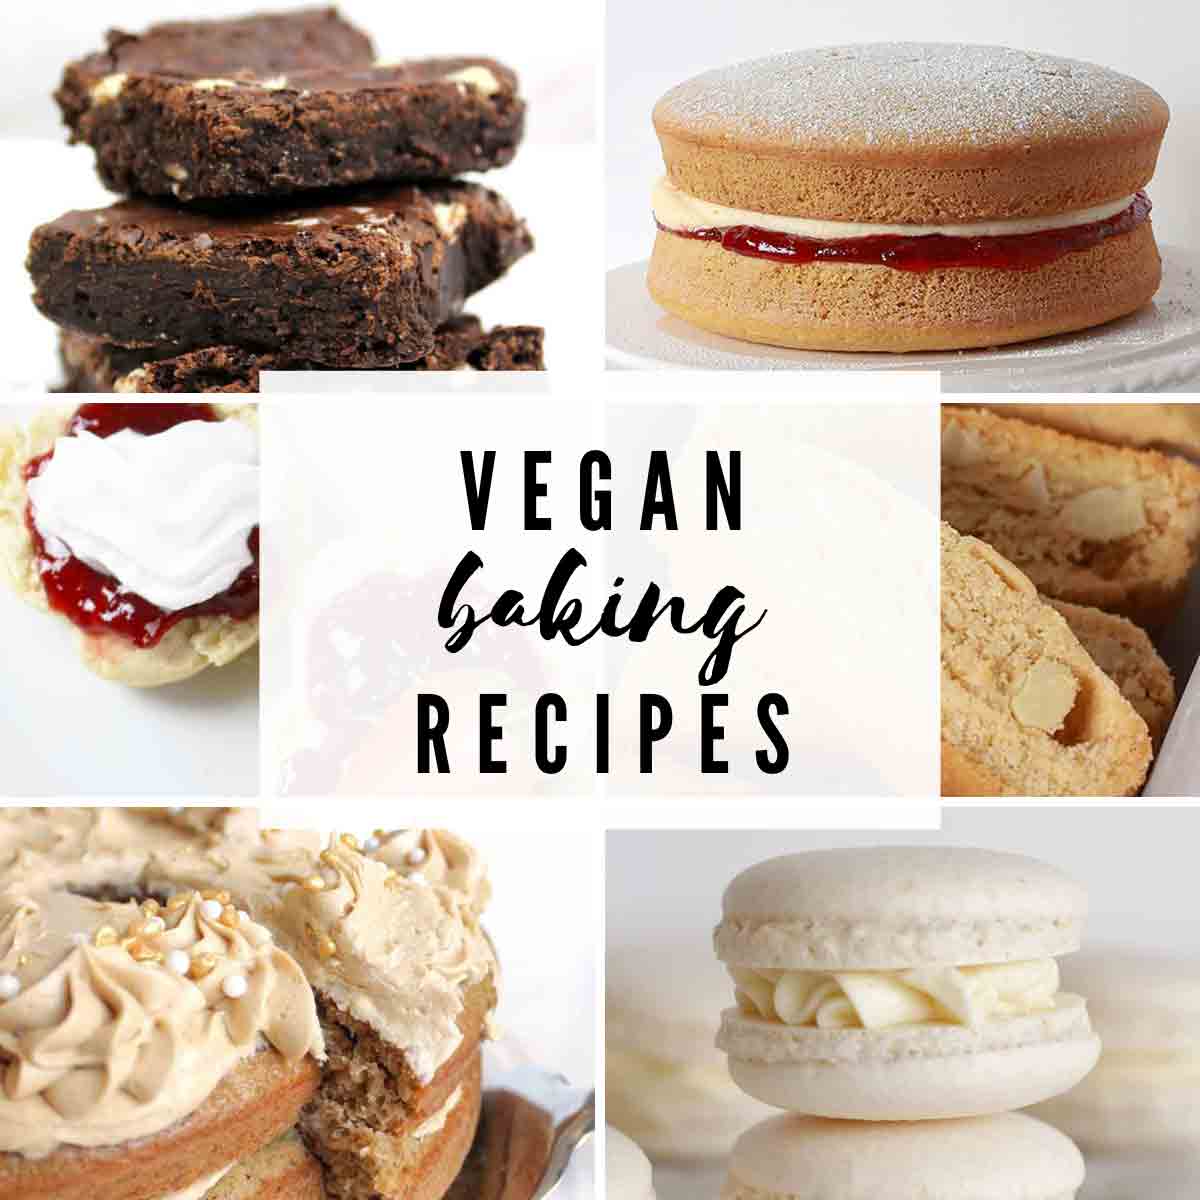 6 Images Of Vegan Baked Goods With Text Overlay That Reads 'vegan Baking Recipes'